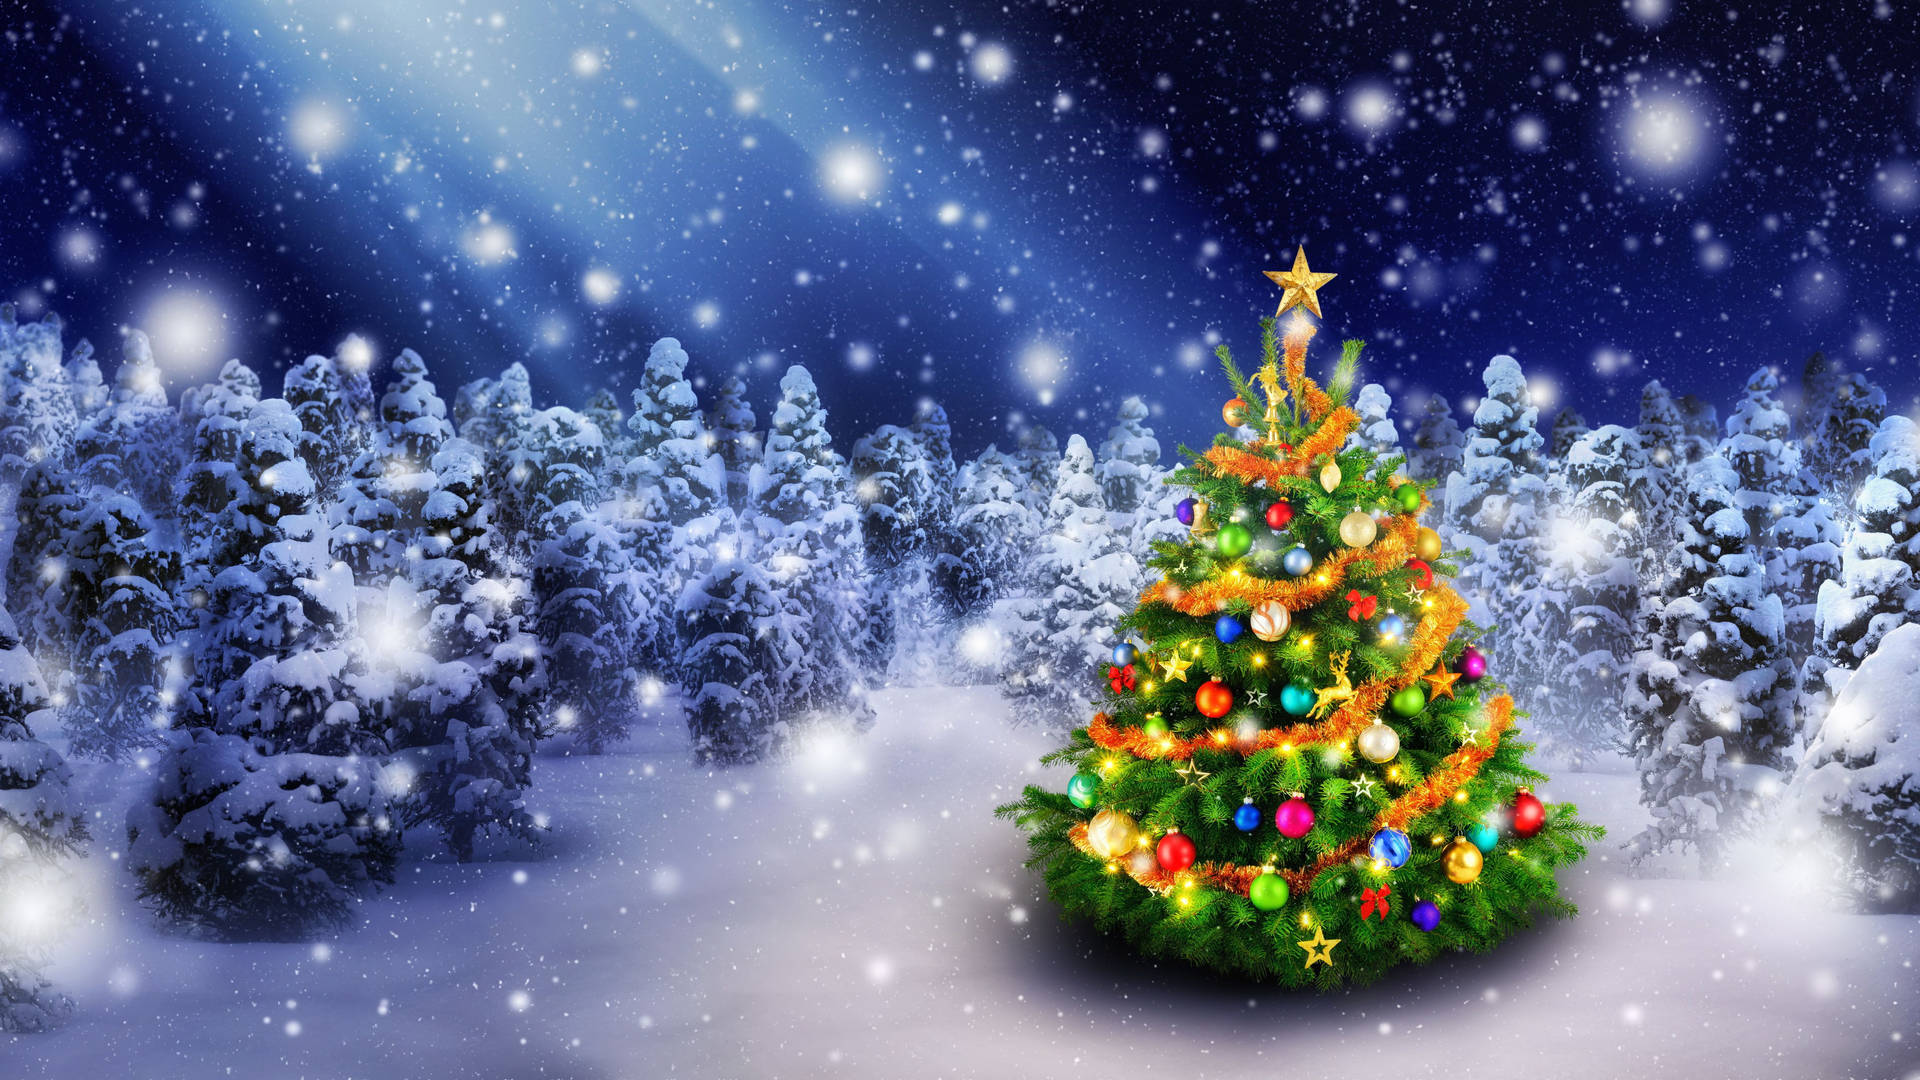 5325X2995 Christmas Tree Wallpaper and Background